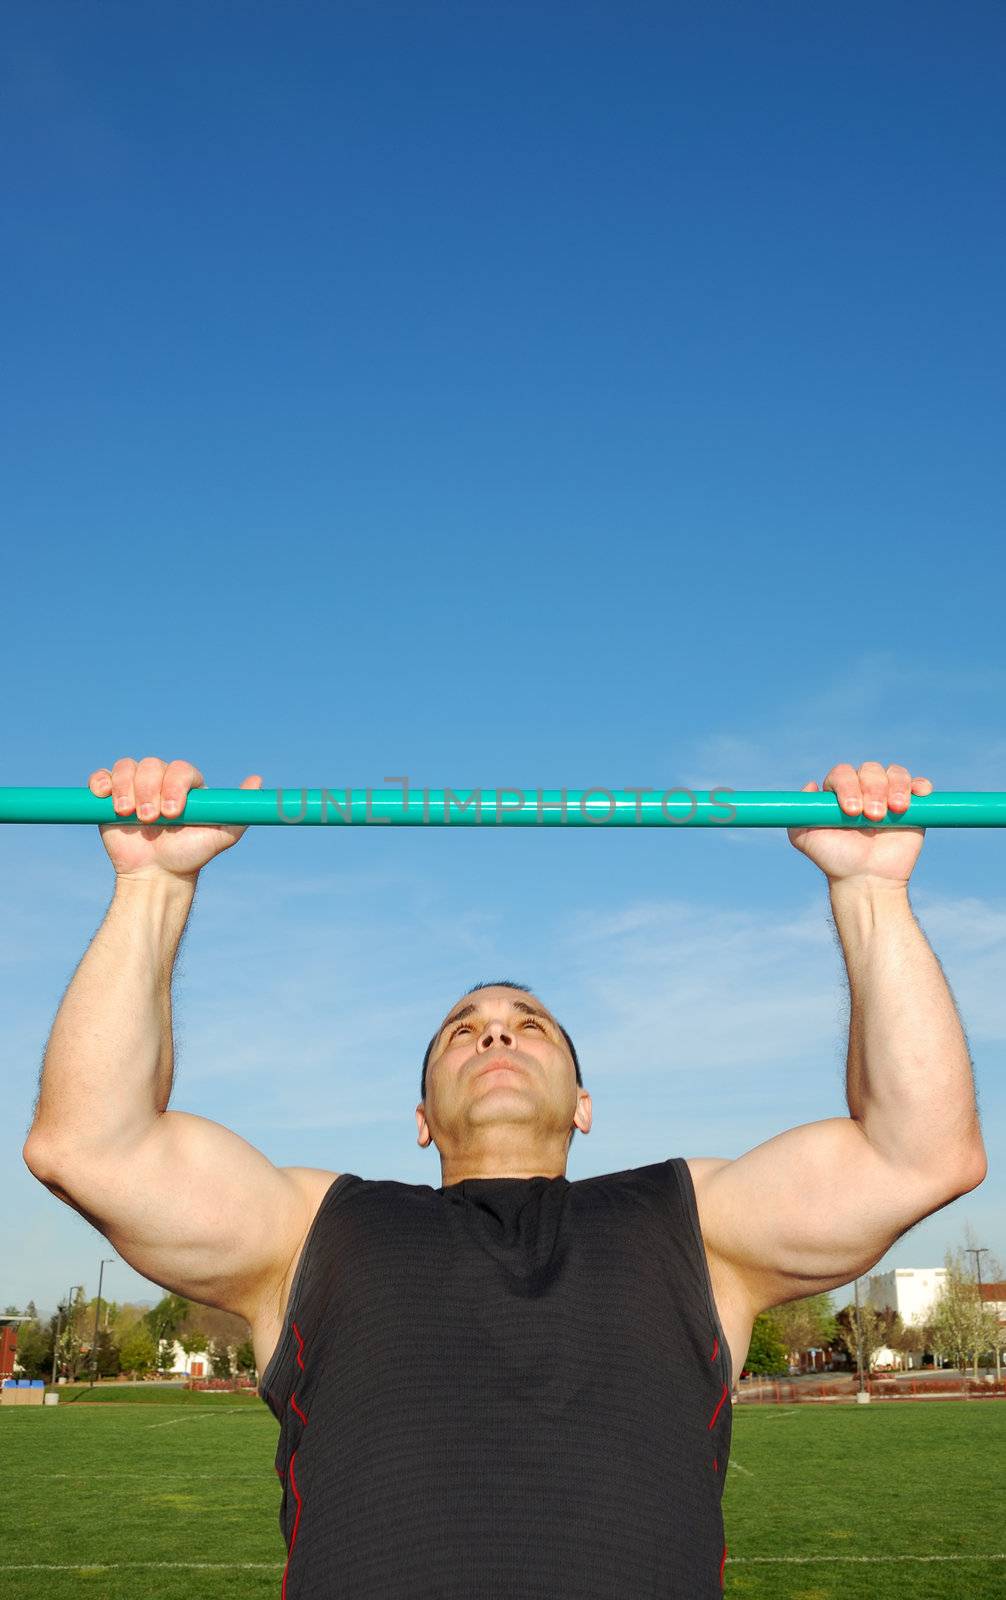 Strong man doing pull ups on a bar in a field with blue sky in the background.